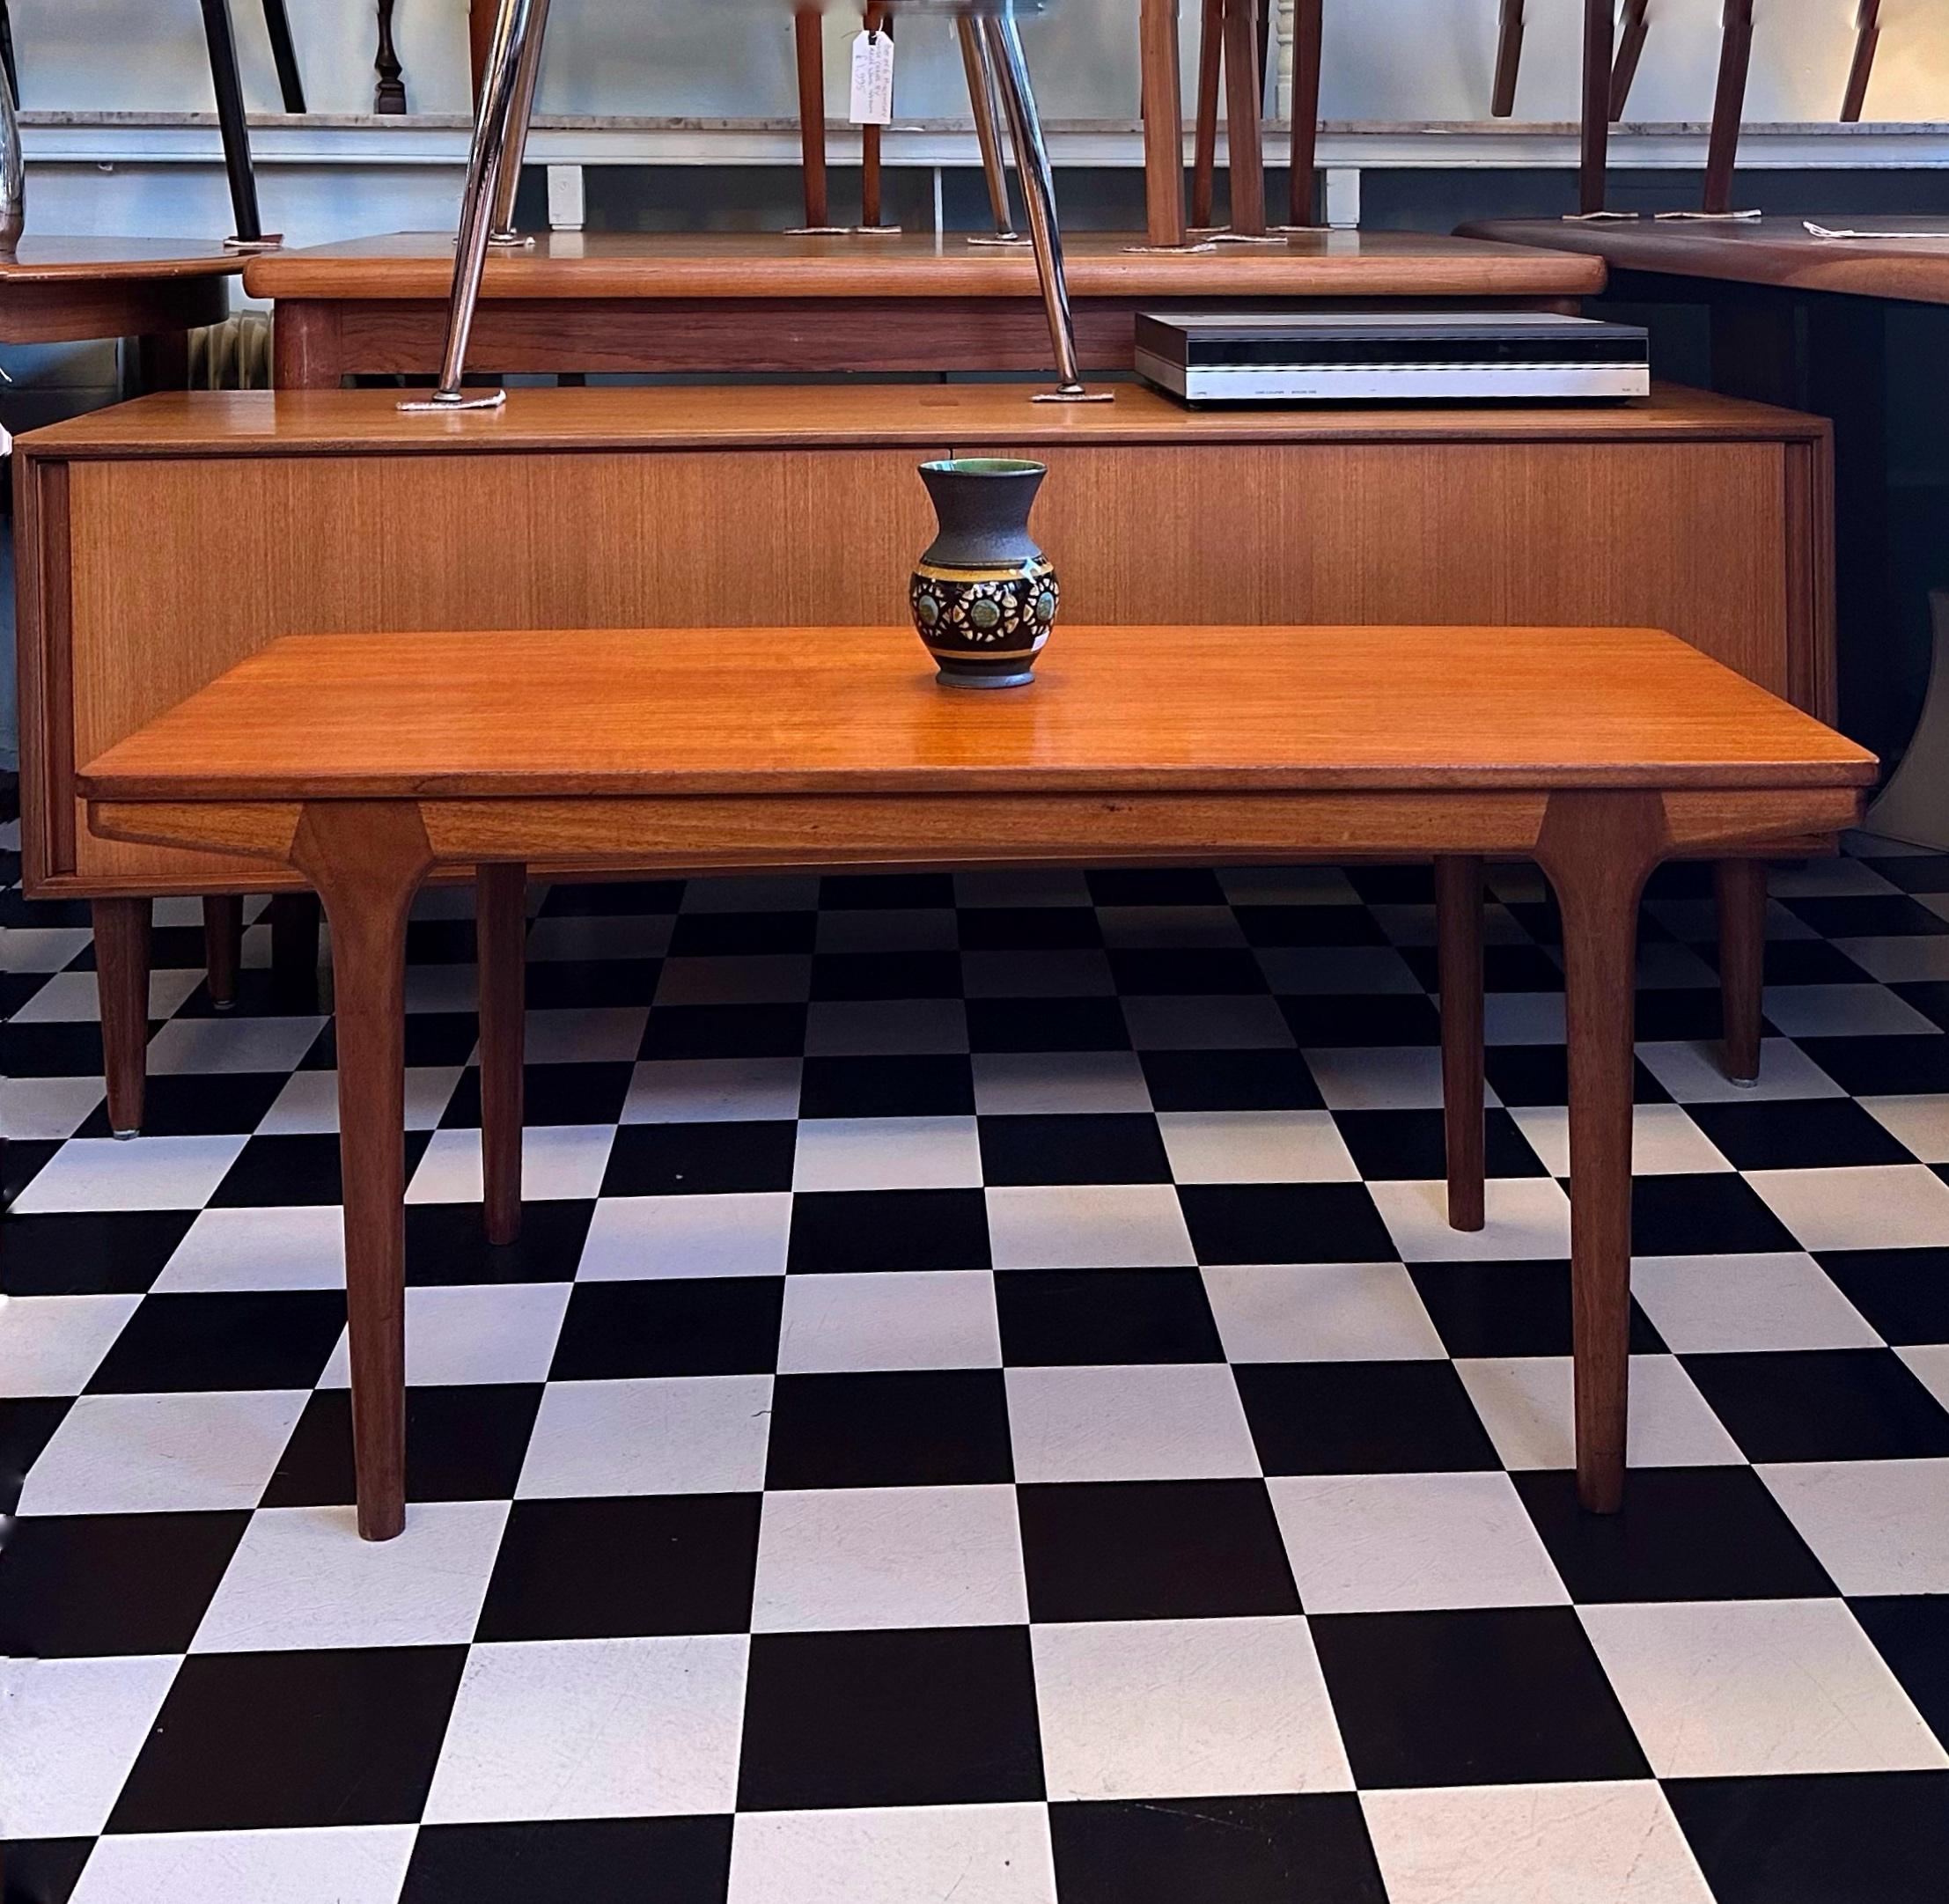 We’re happy to provide our own competitive shipping quotes with trusted couriers. Please message us with your postcode for a more accurate price. Thank you.

Beautiful mid-century modern teak long coffee table. Designed in 1960's by A.H. McIntosh.